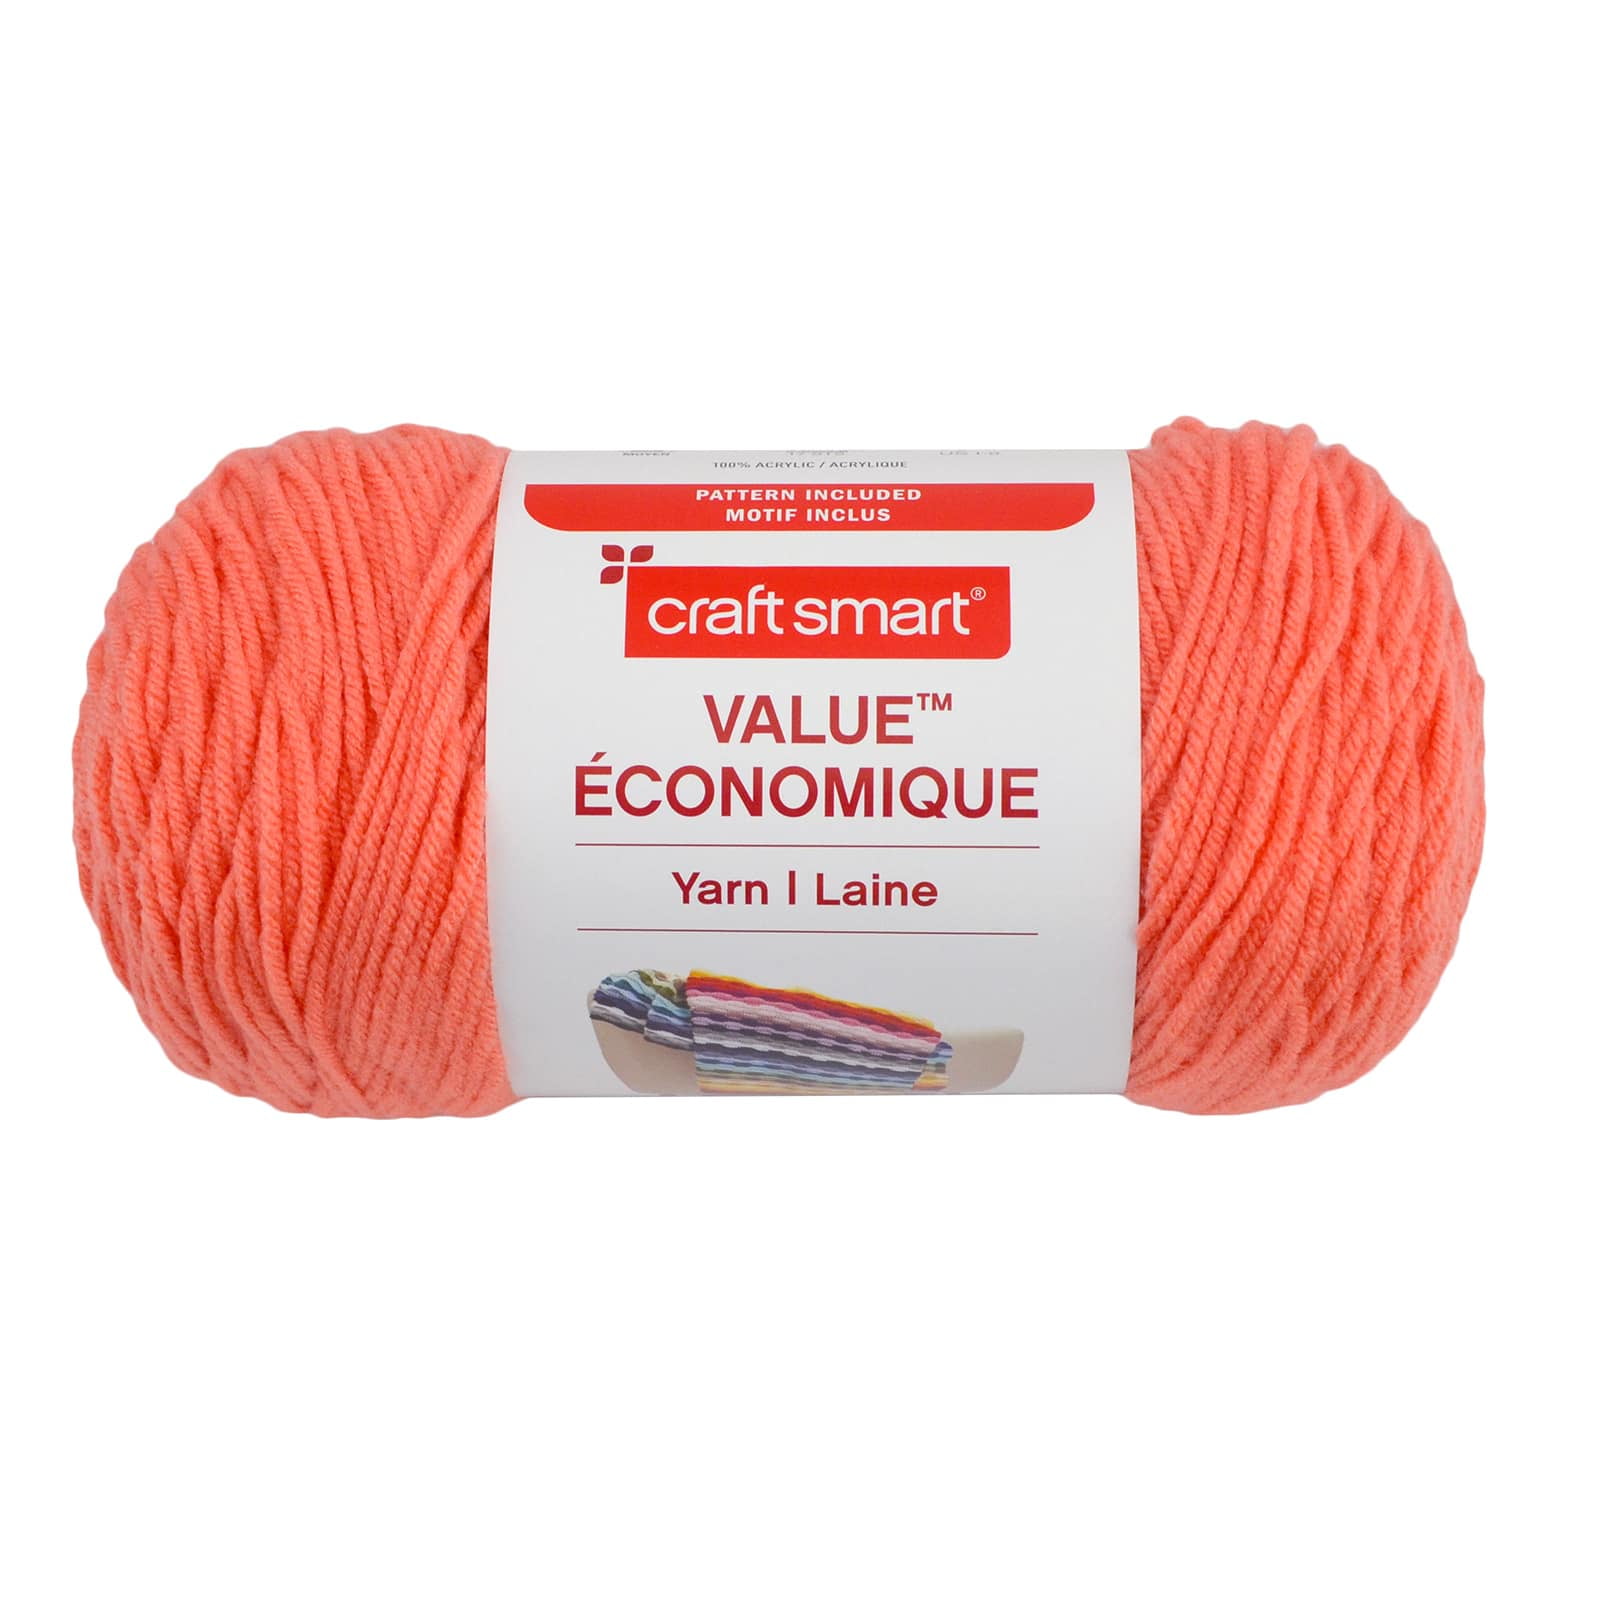 Soft Classic Solid Yarn by Loops & Threads - Solid Color Yarn for Knitting,  Crochet, Weaving, Arts & Crafts - Coral, Bulk 12 Pack 